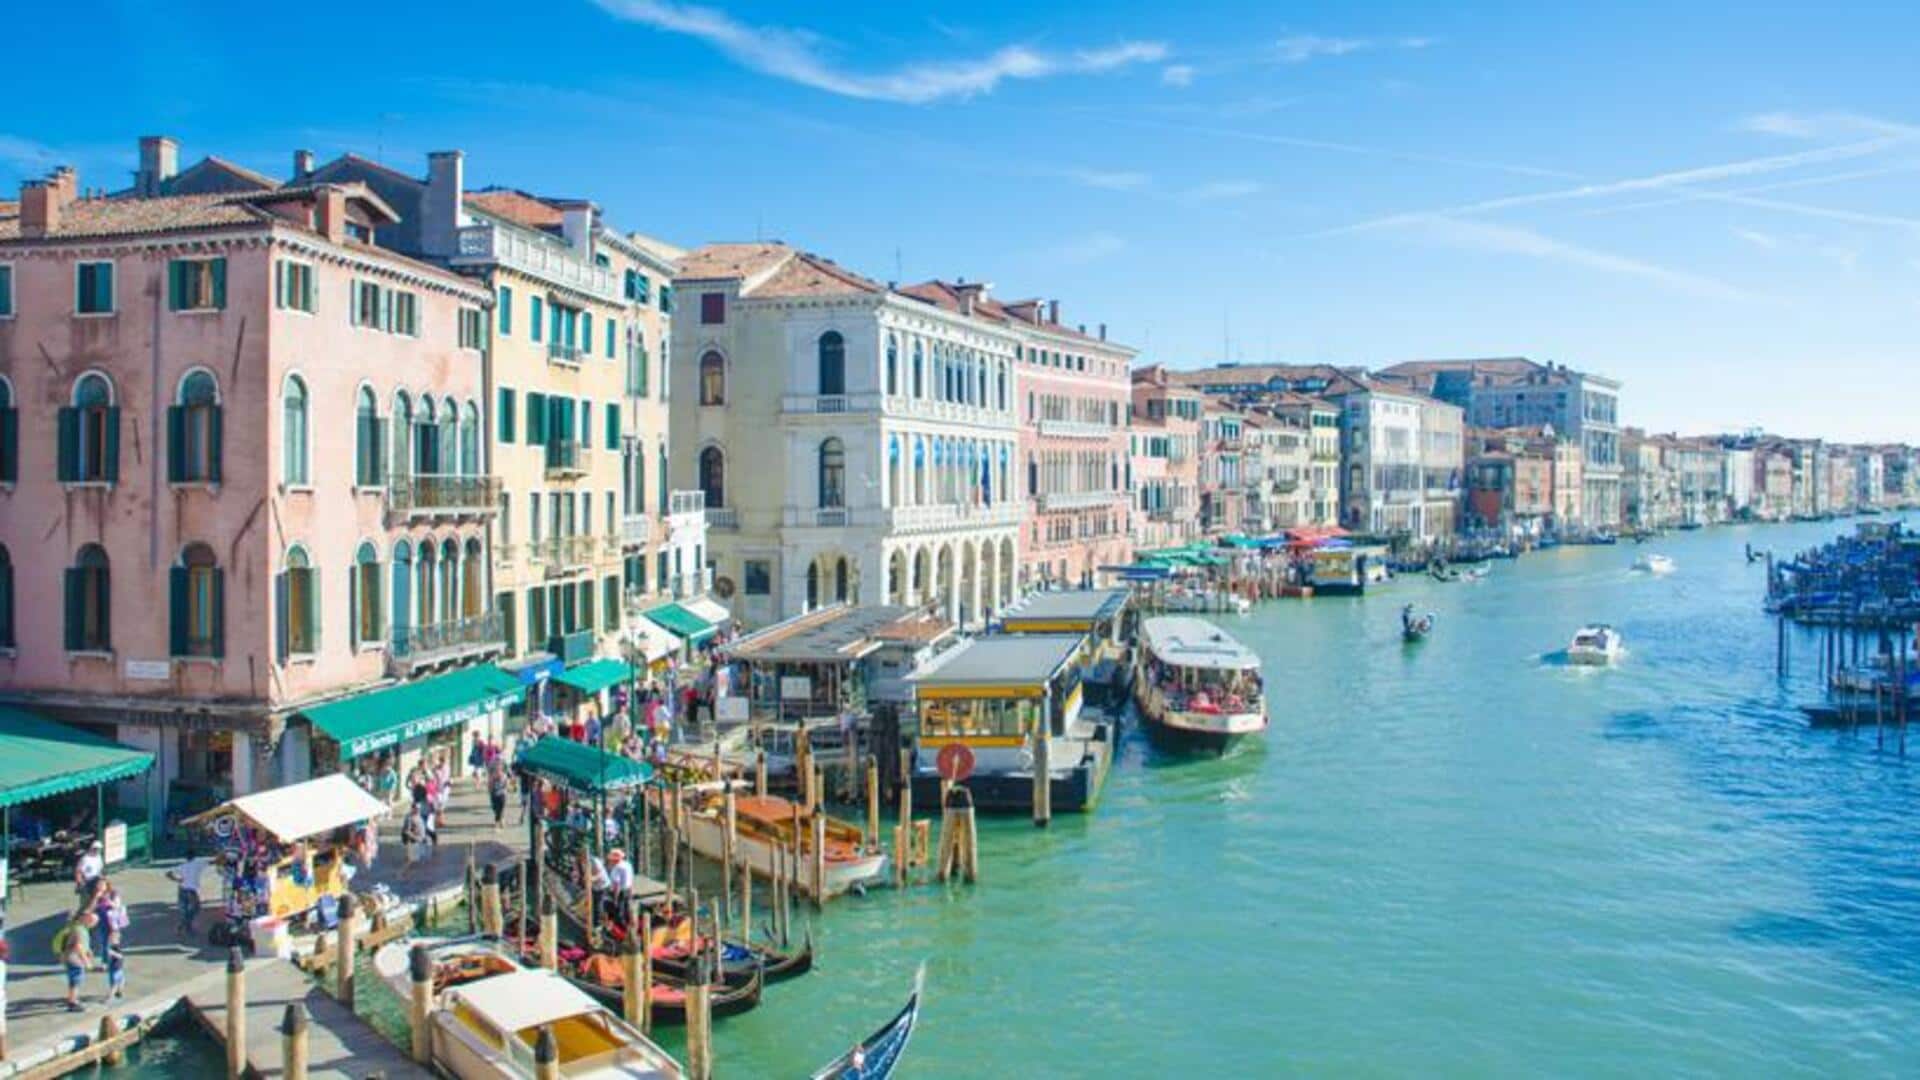 Explore Venice's hidden island treasures with this travel guide